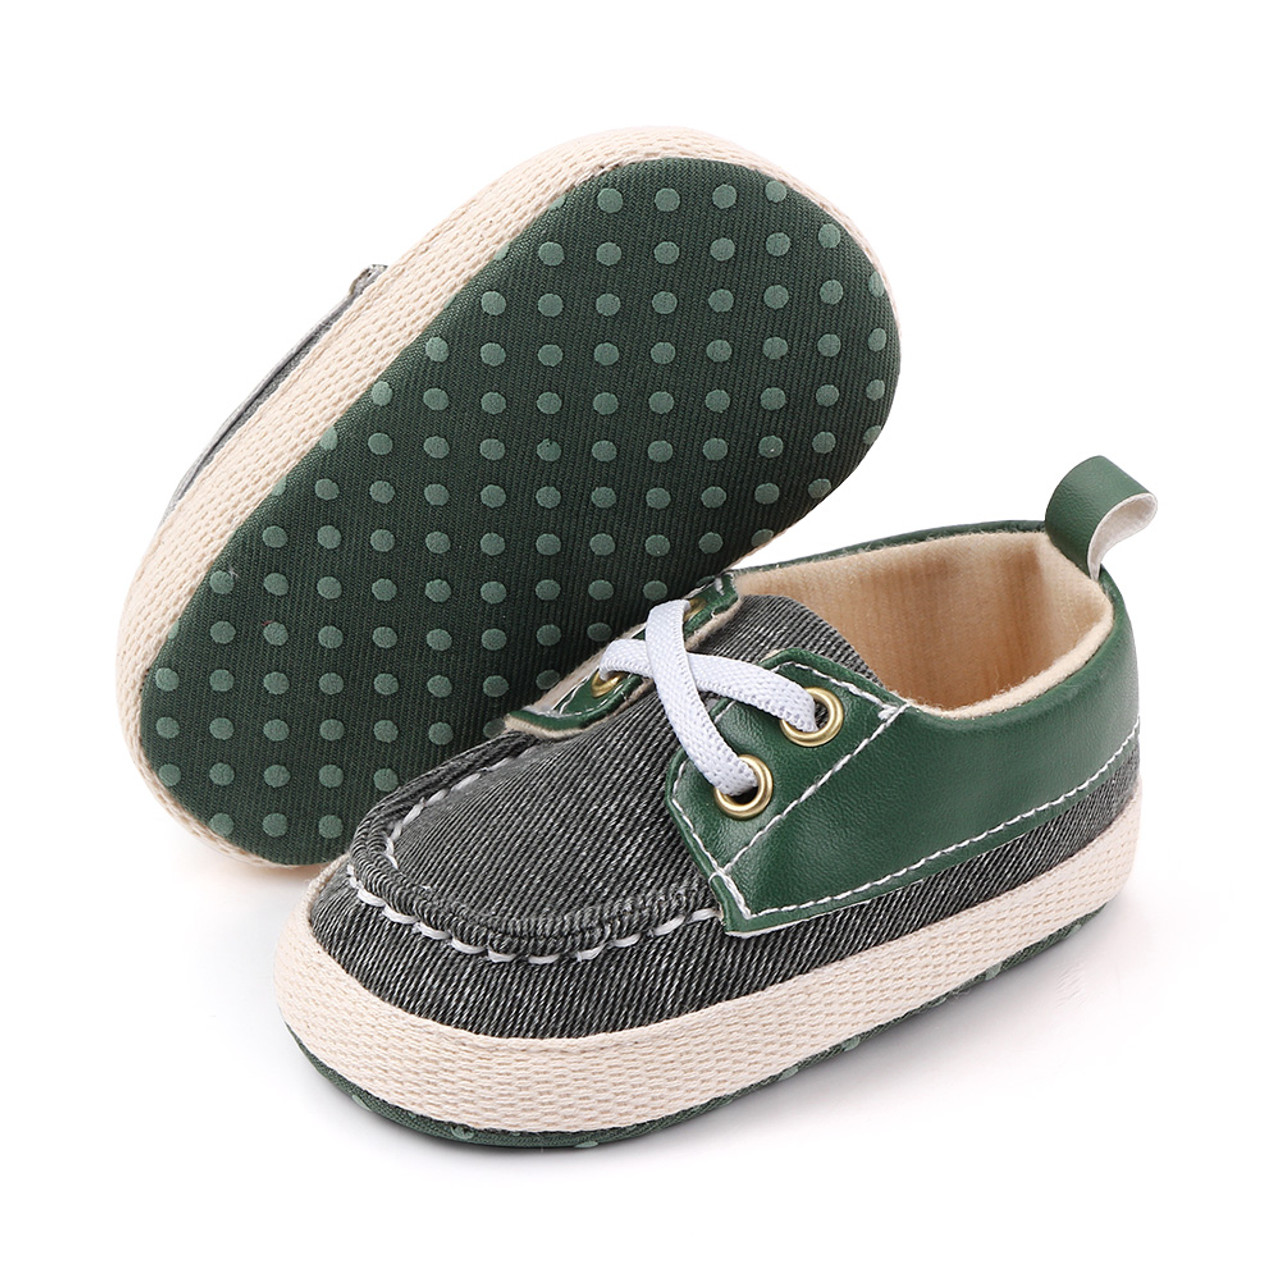 Mikey Green Slip-On Sneakers with Leather Accents